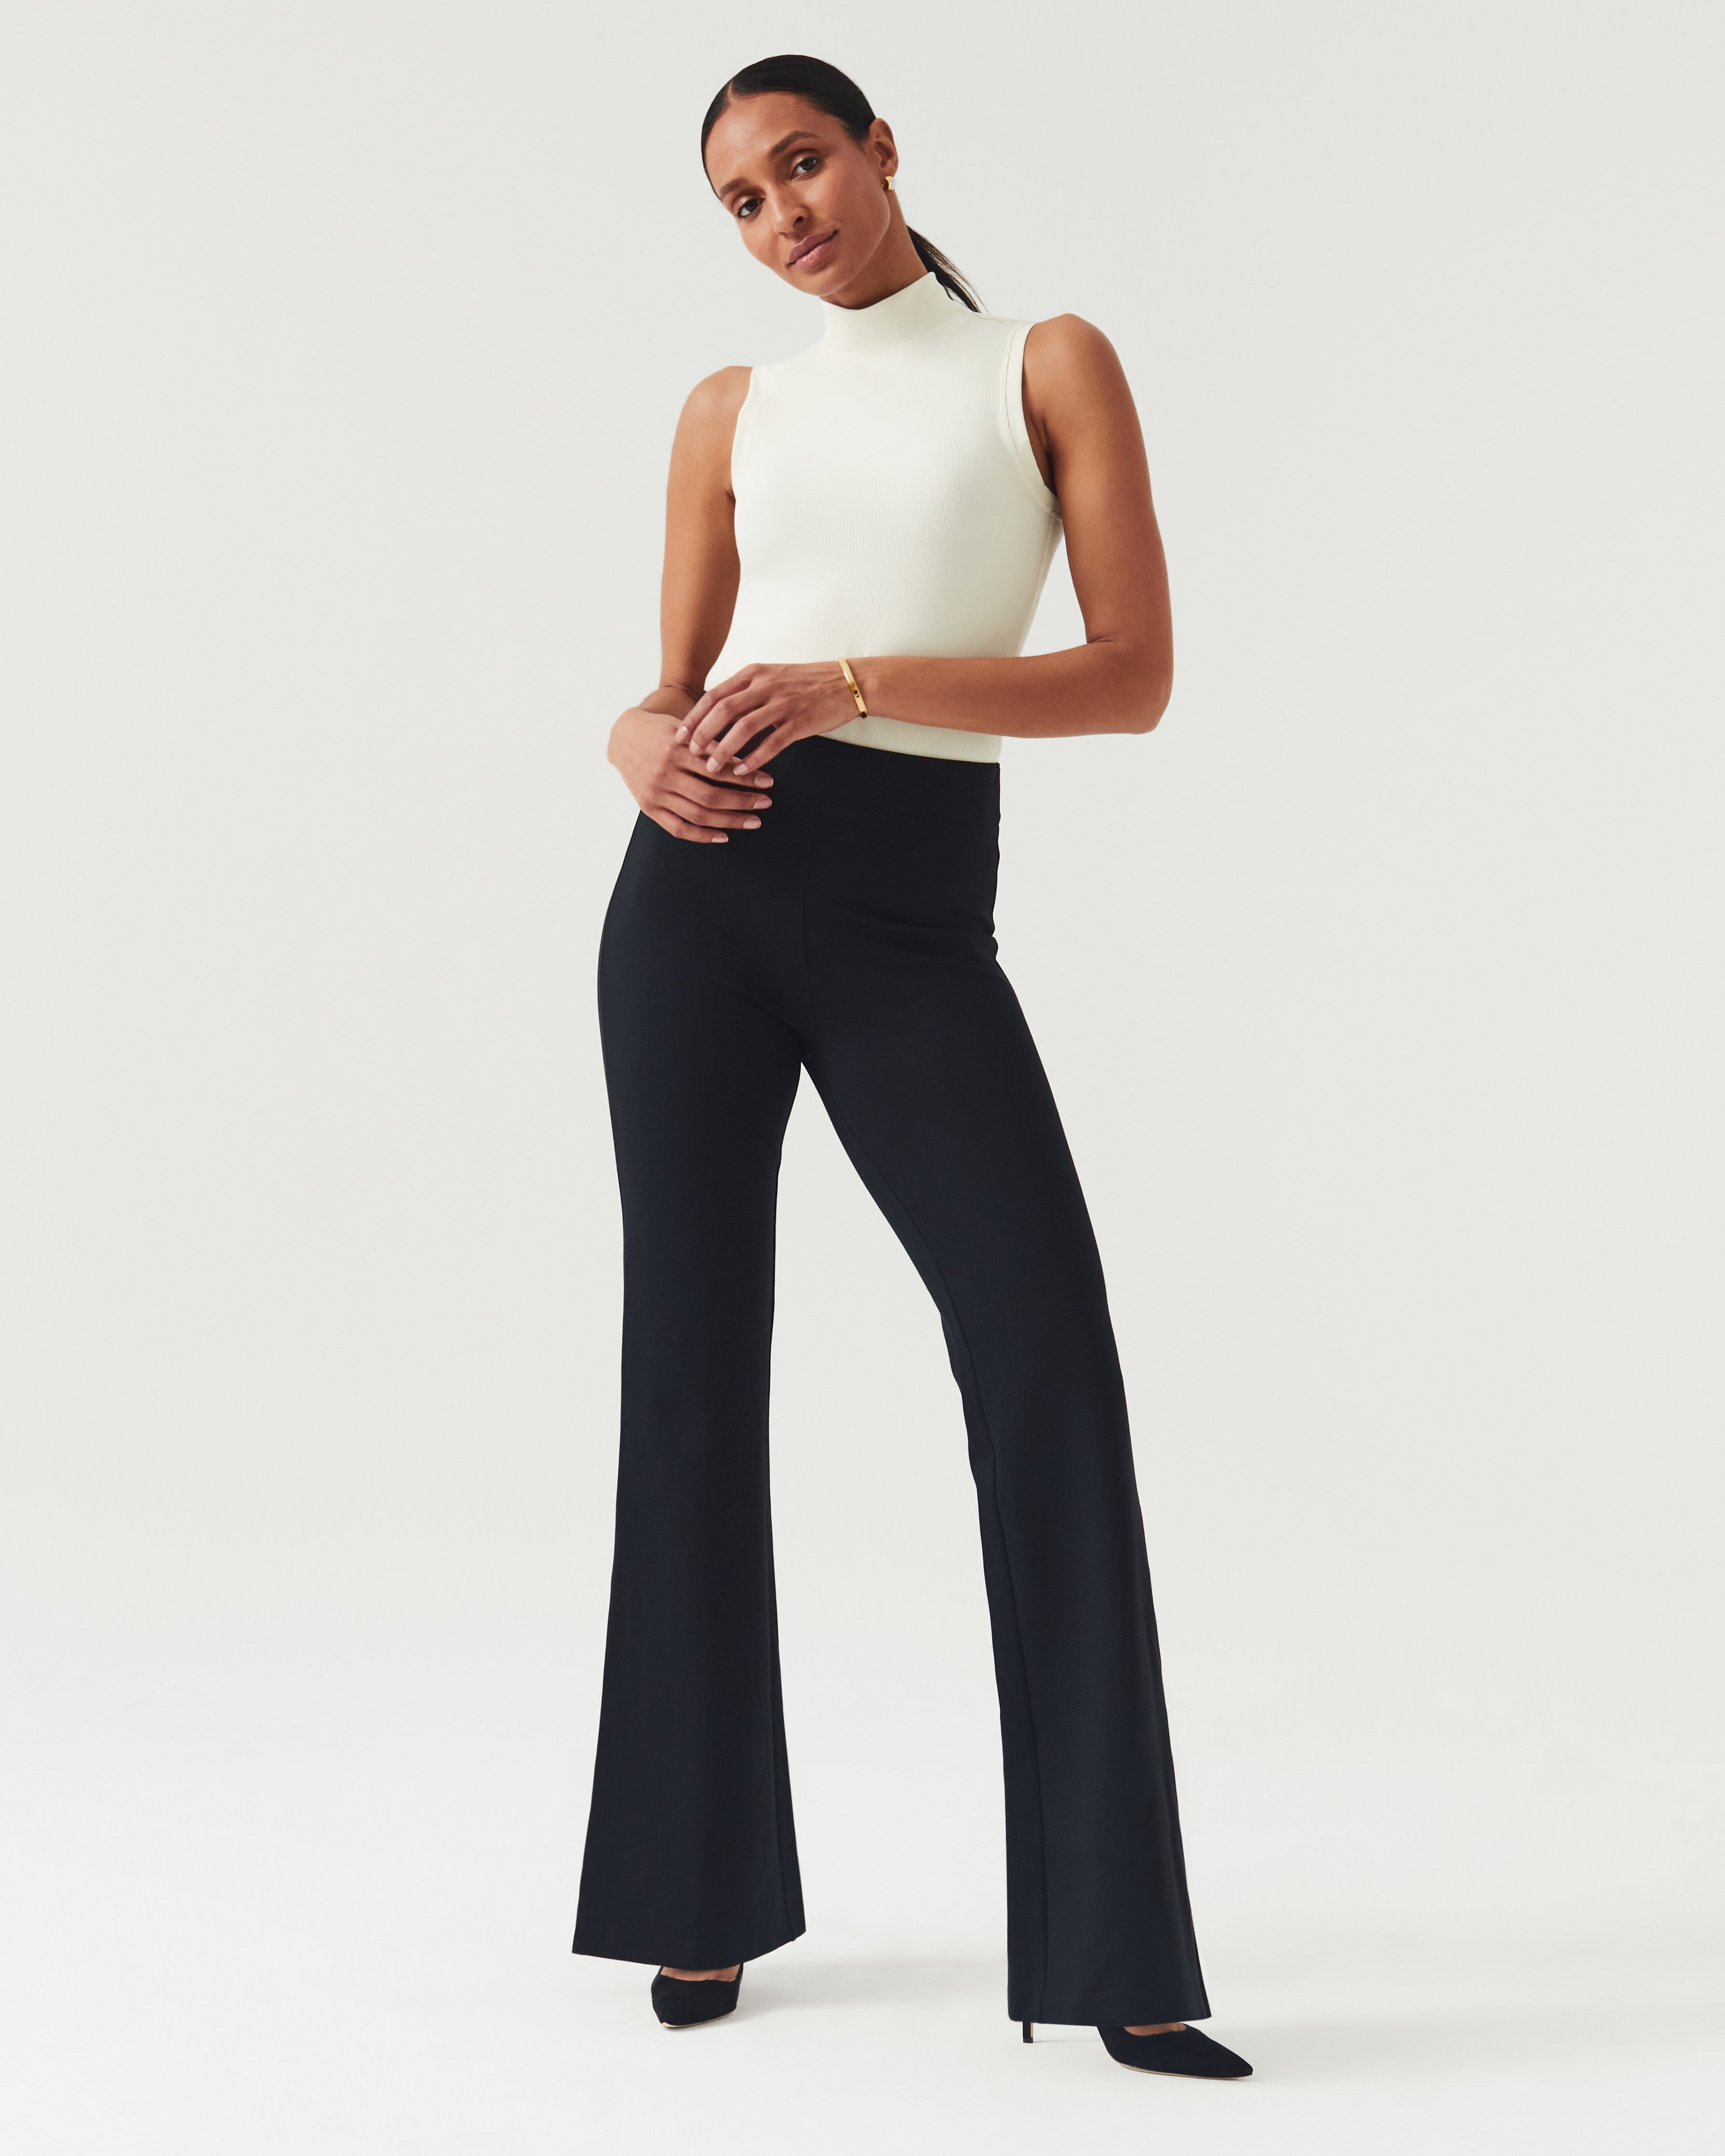 Spanx On-the-Go Wide Leg Pant black medium petite Size undefined - $88 -  From J